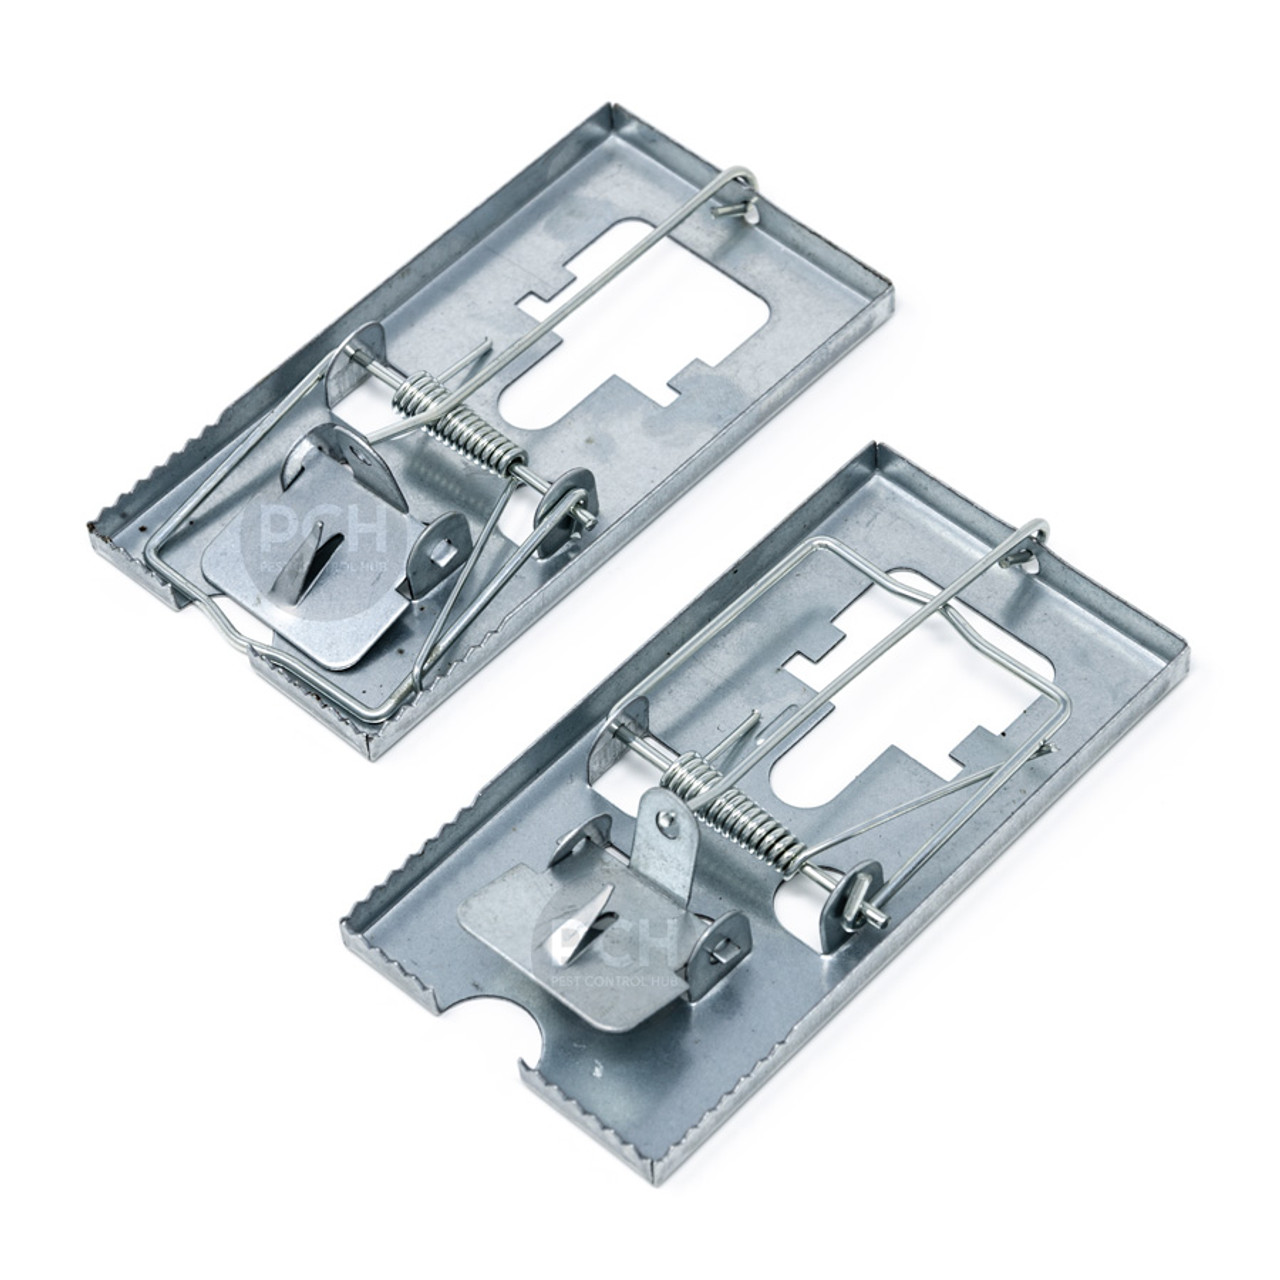 Mastertrap Reusable Metal Mouse Traps Twin Pack